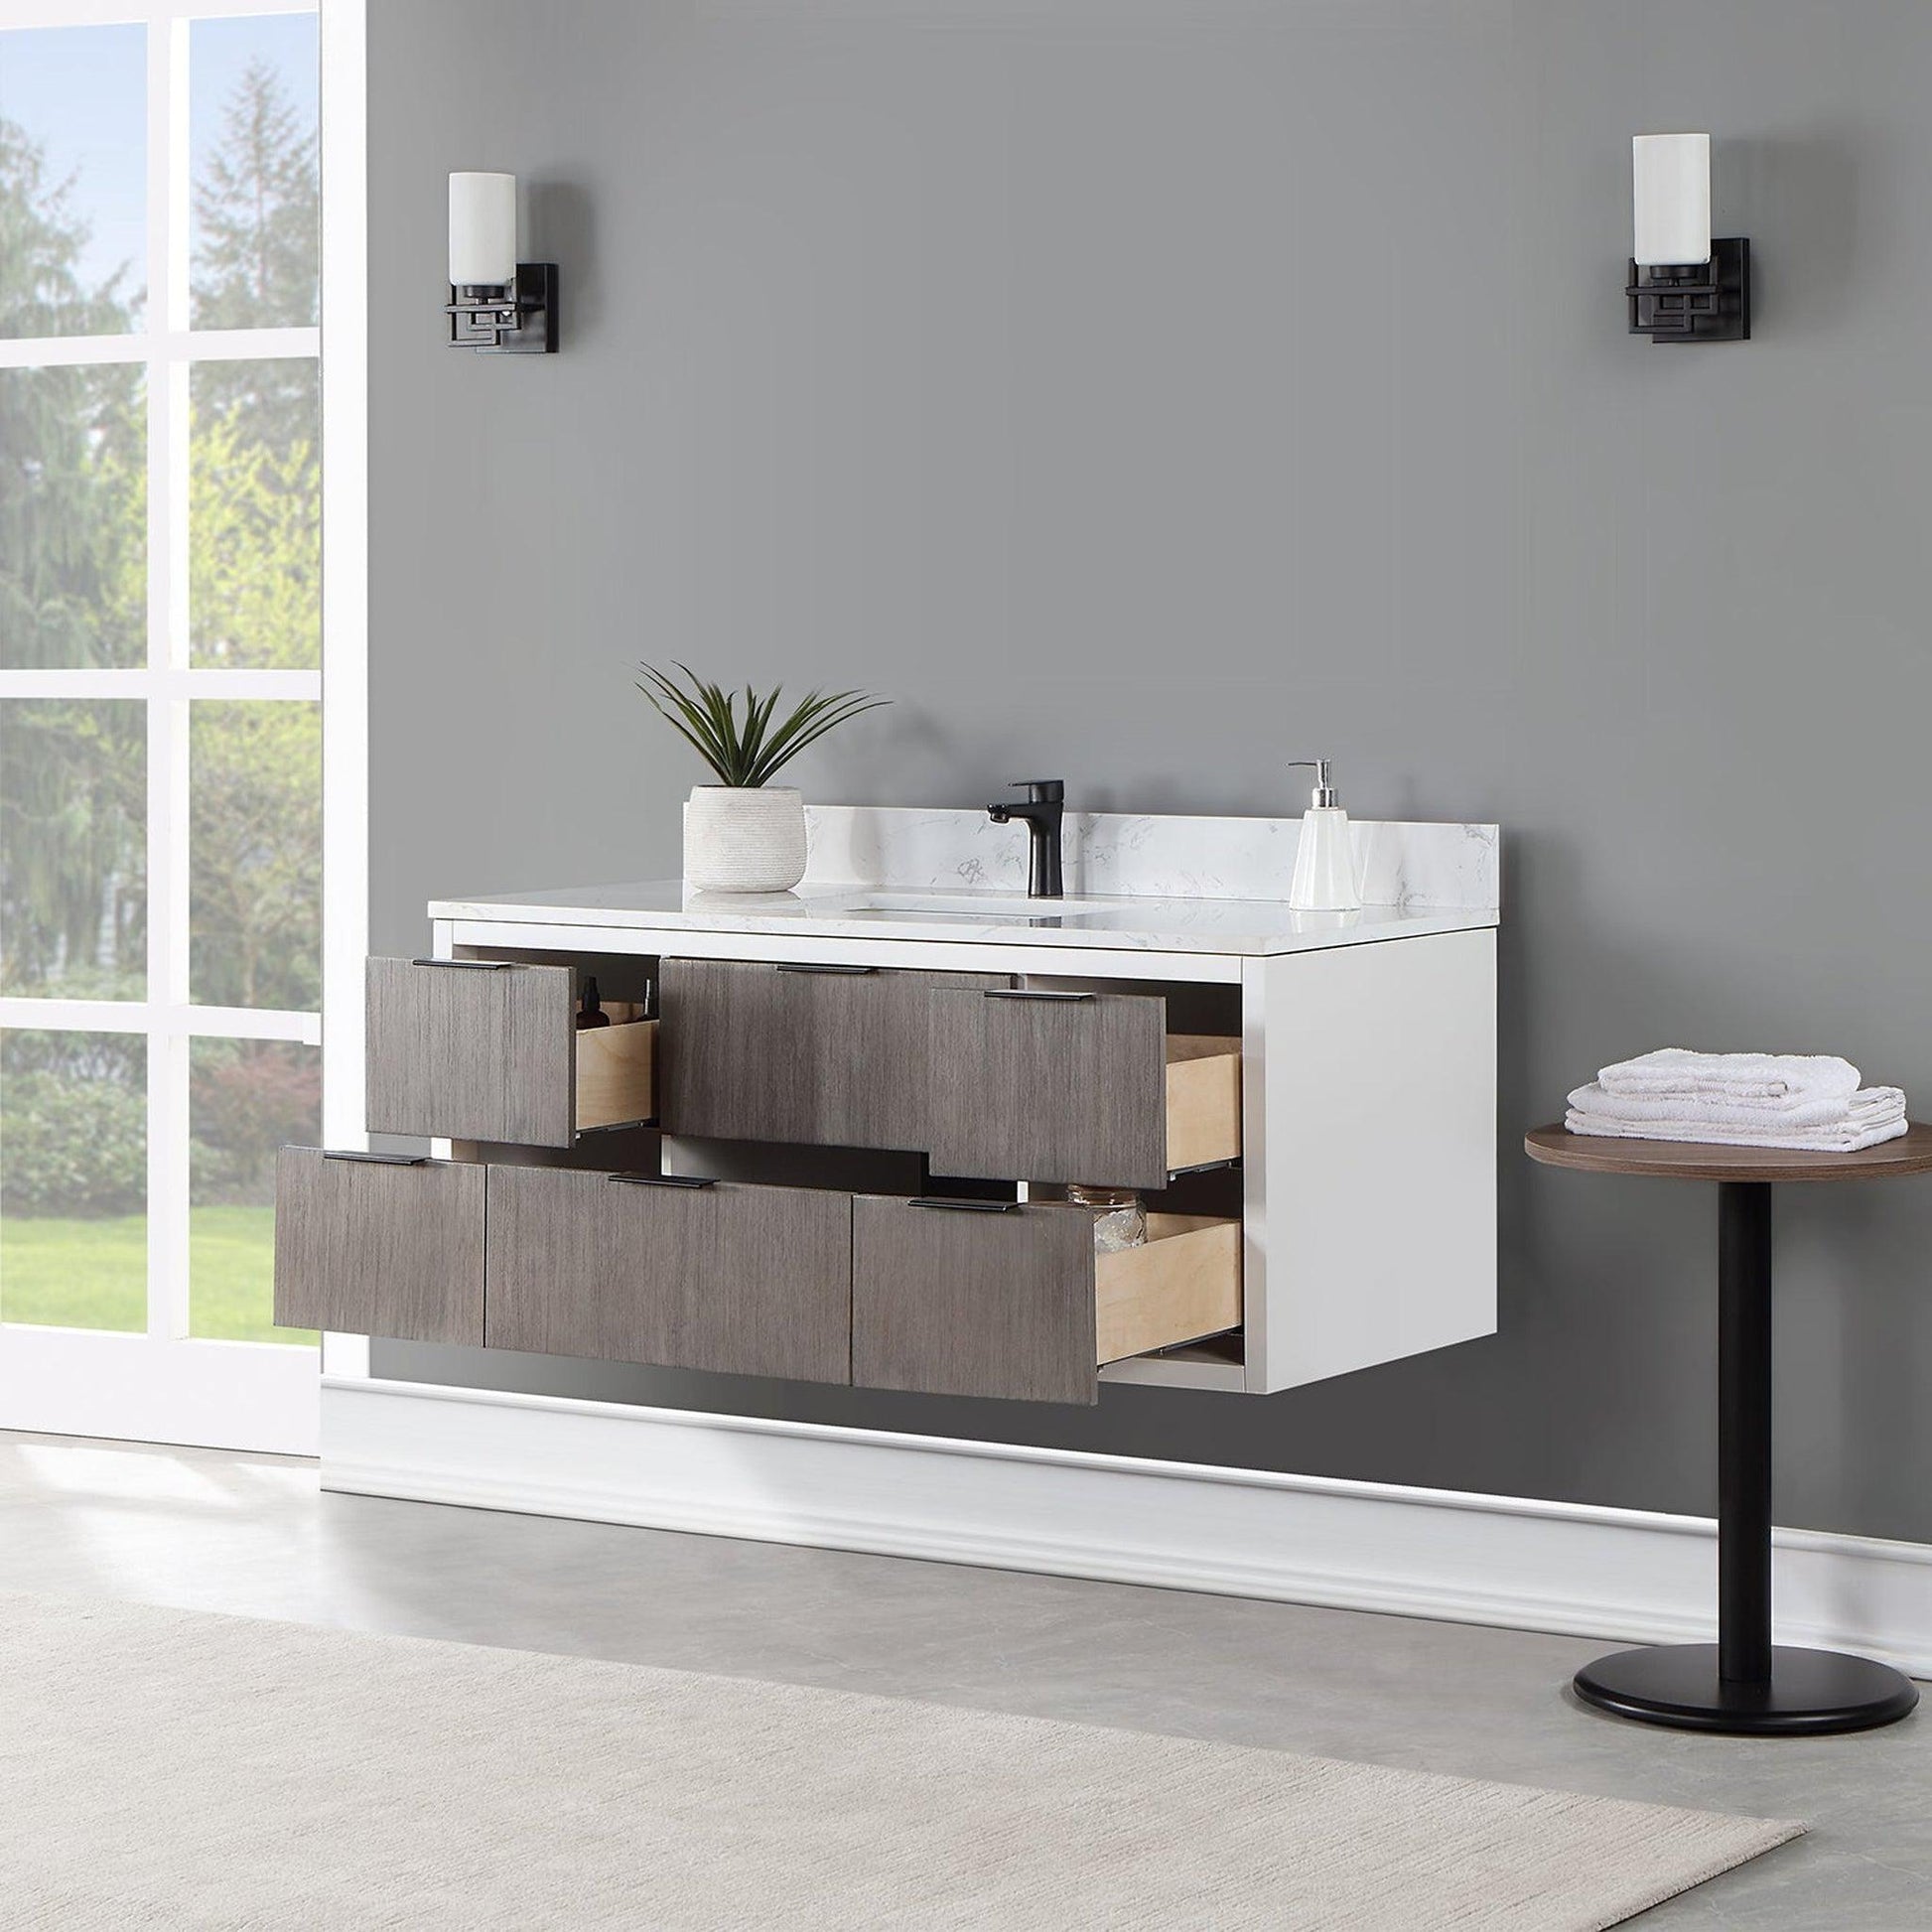 Altair Dione 48" Single Classical Gray Wall-Mounted Bathroom Vanity Set With Aosta White Composite Stone Top, Single Rectangular Undermount Ceramic Sink, Overflow, and Backsplash